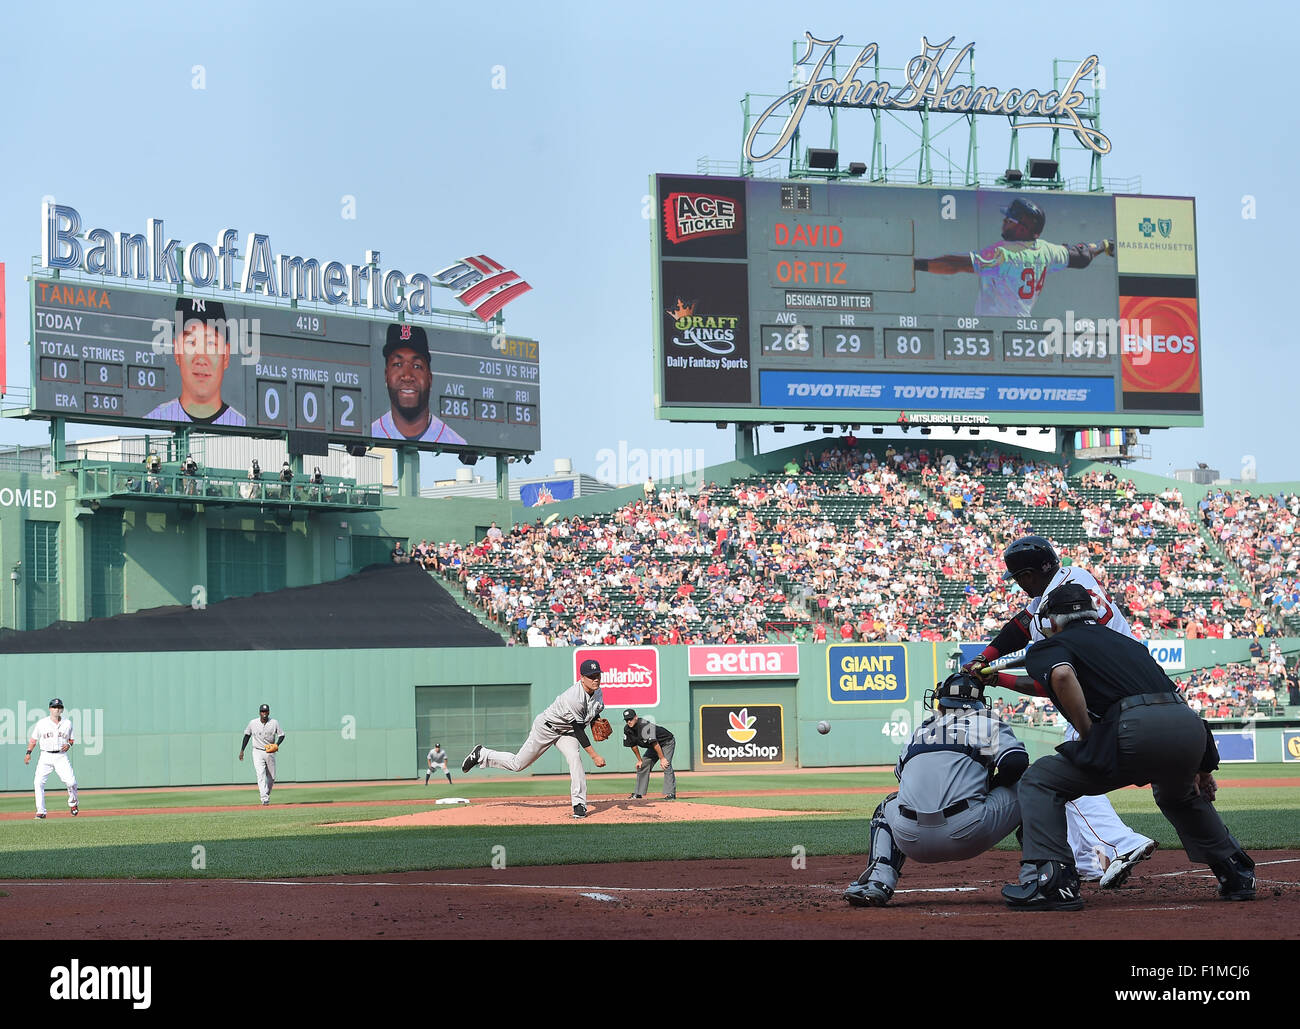 Green Monster at Fenway Park home of the MLB Boston Red Sox Stock Photo -  Alamy